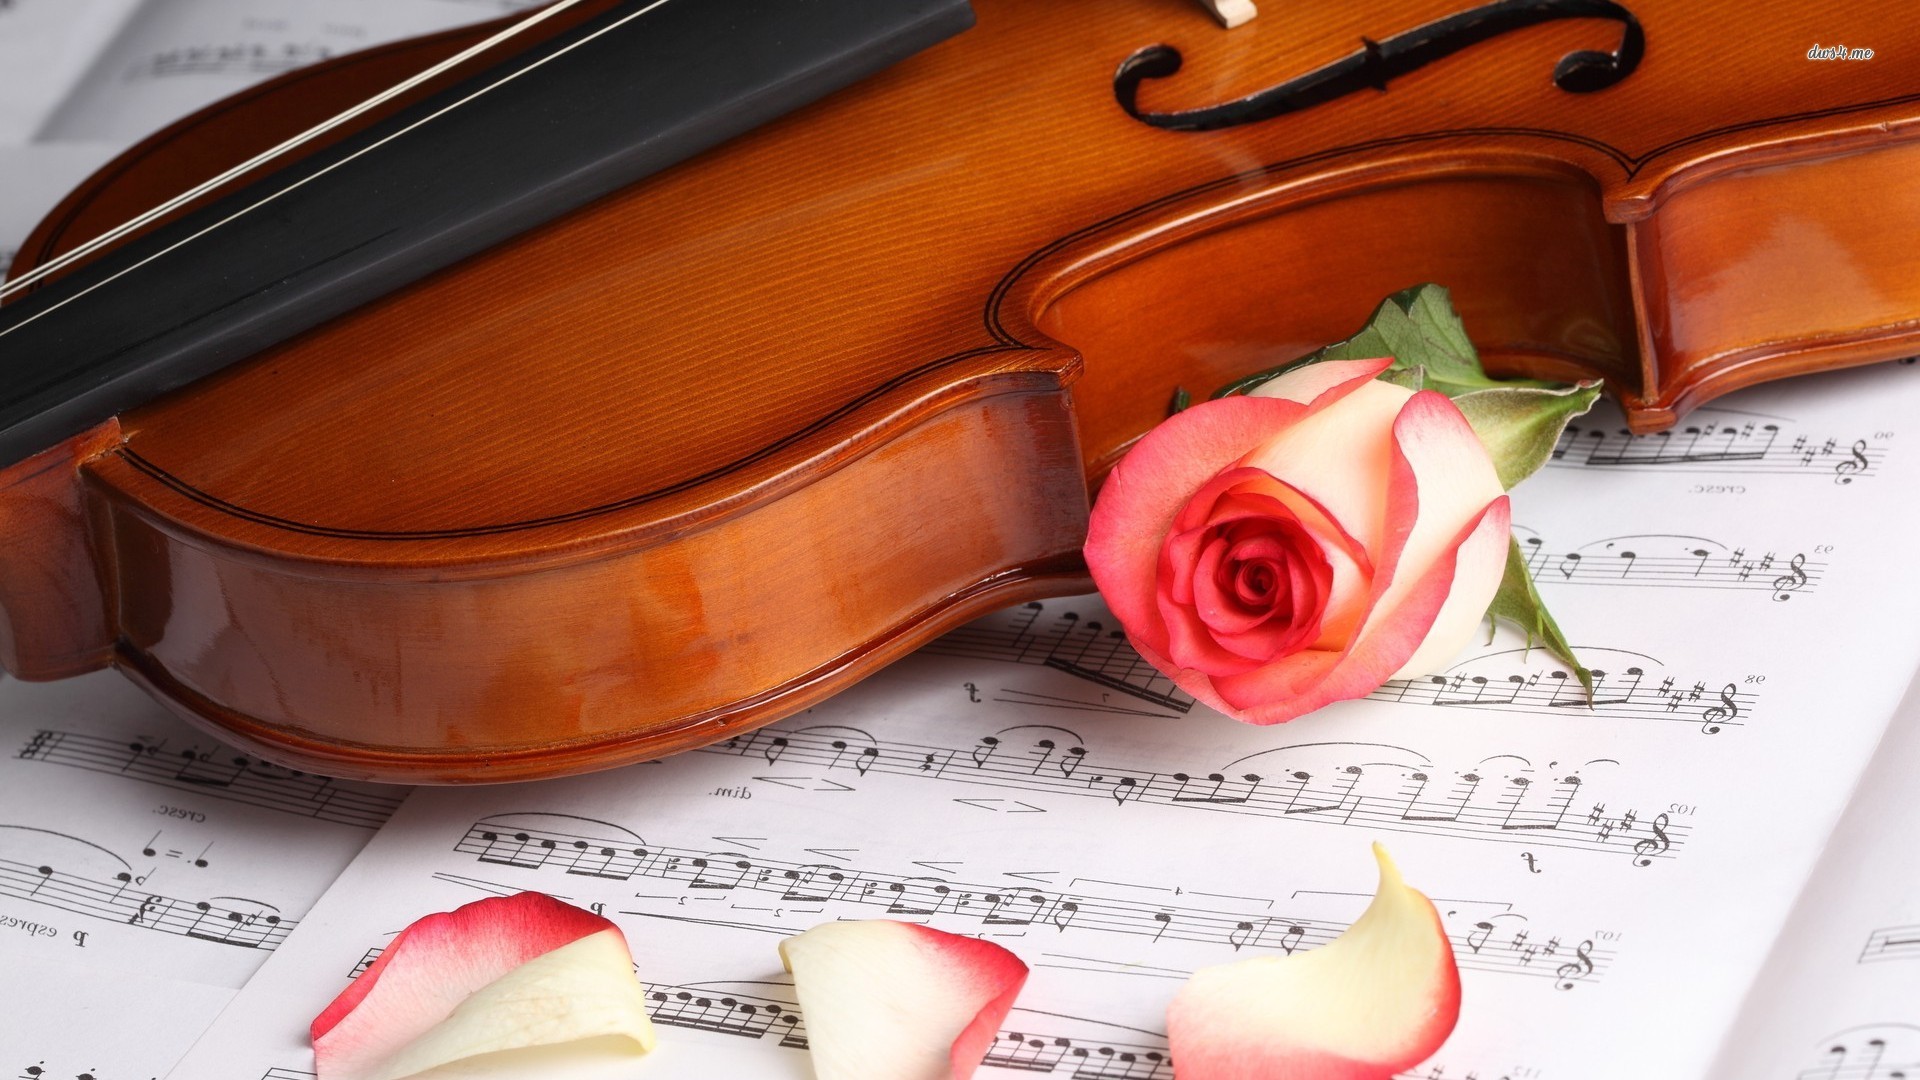 1920x1080 Violin and rose on music sheet Photography HD desktop wallpaper, Rose  wallpaper, Sheet wallpaper, Violin wallpaper - Photography no.